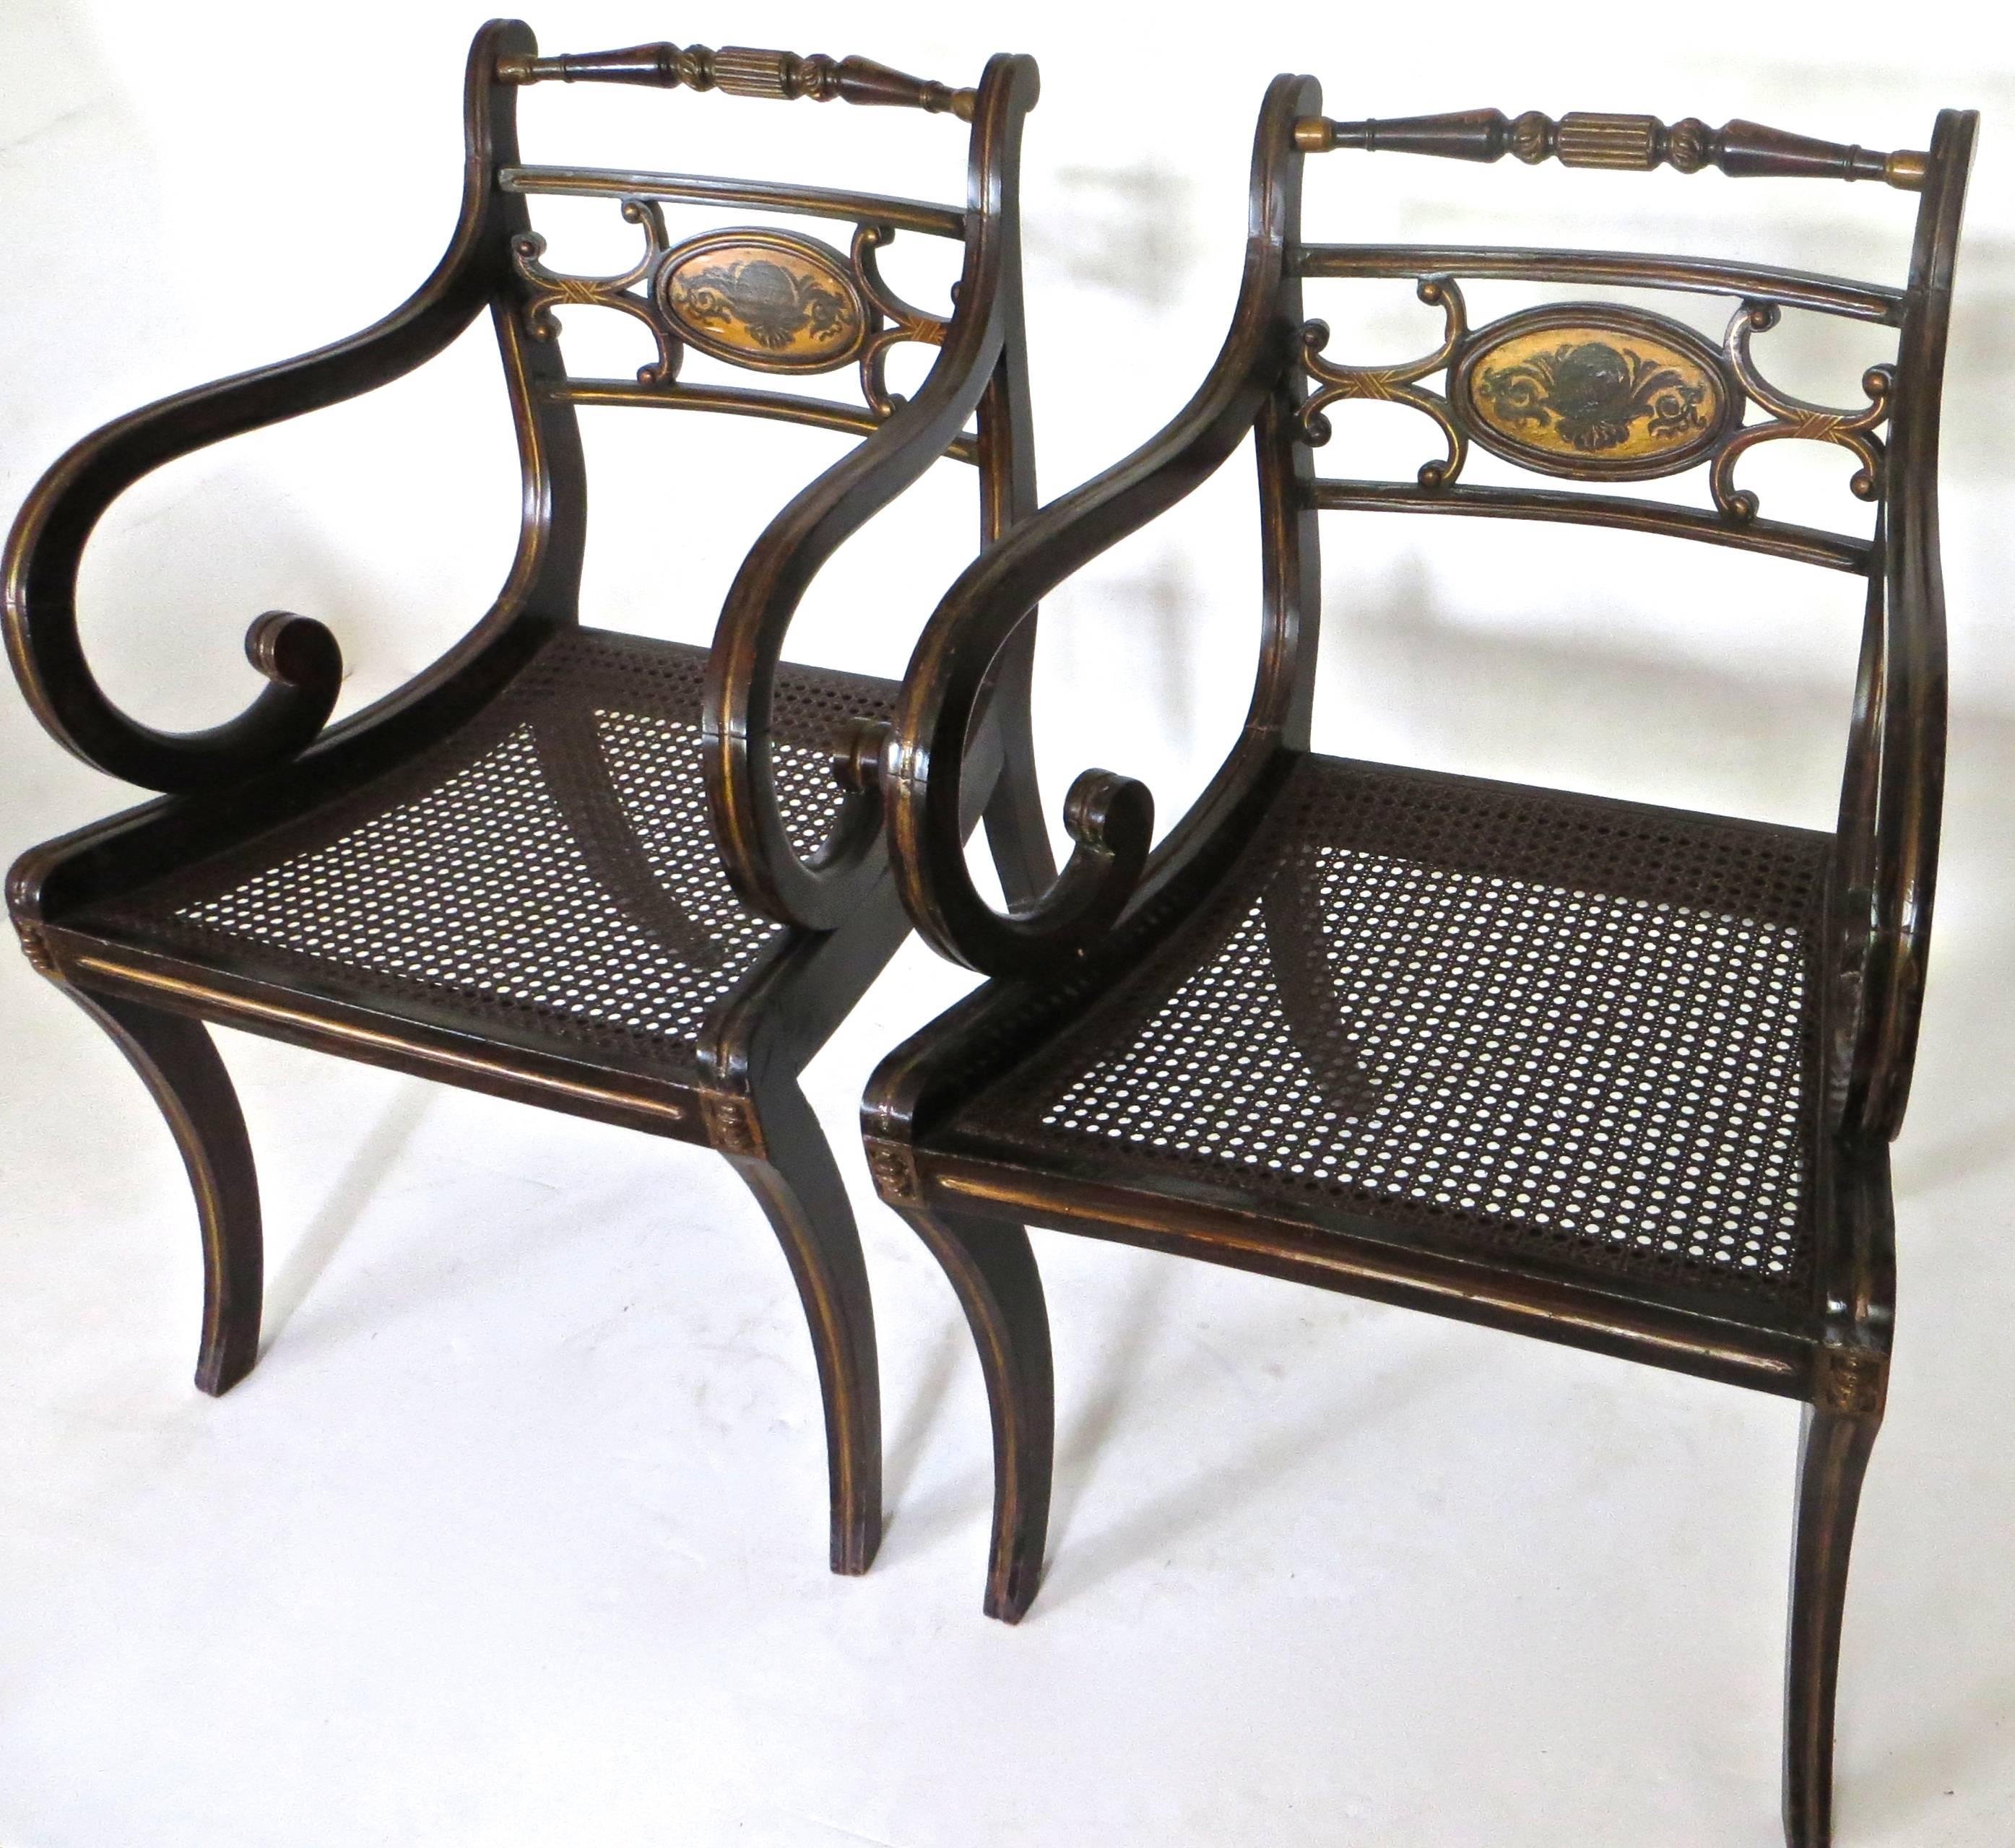 Fine pair of British Regency chairs with caned seats; the turned back has a turned crest rail; the centre oval tablet on the back is decorated.
With a shell and foliate scroll, supported and joined with a pair of 